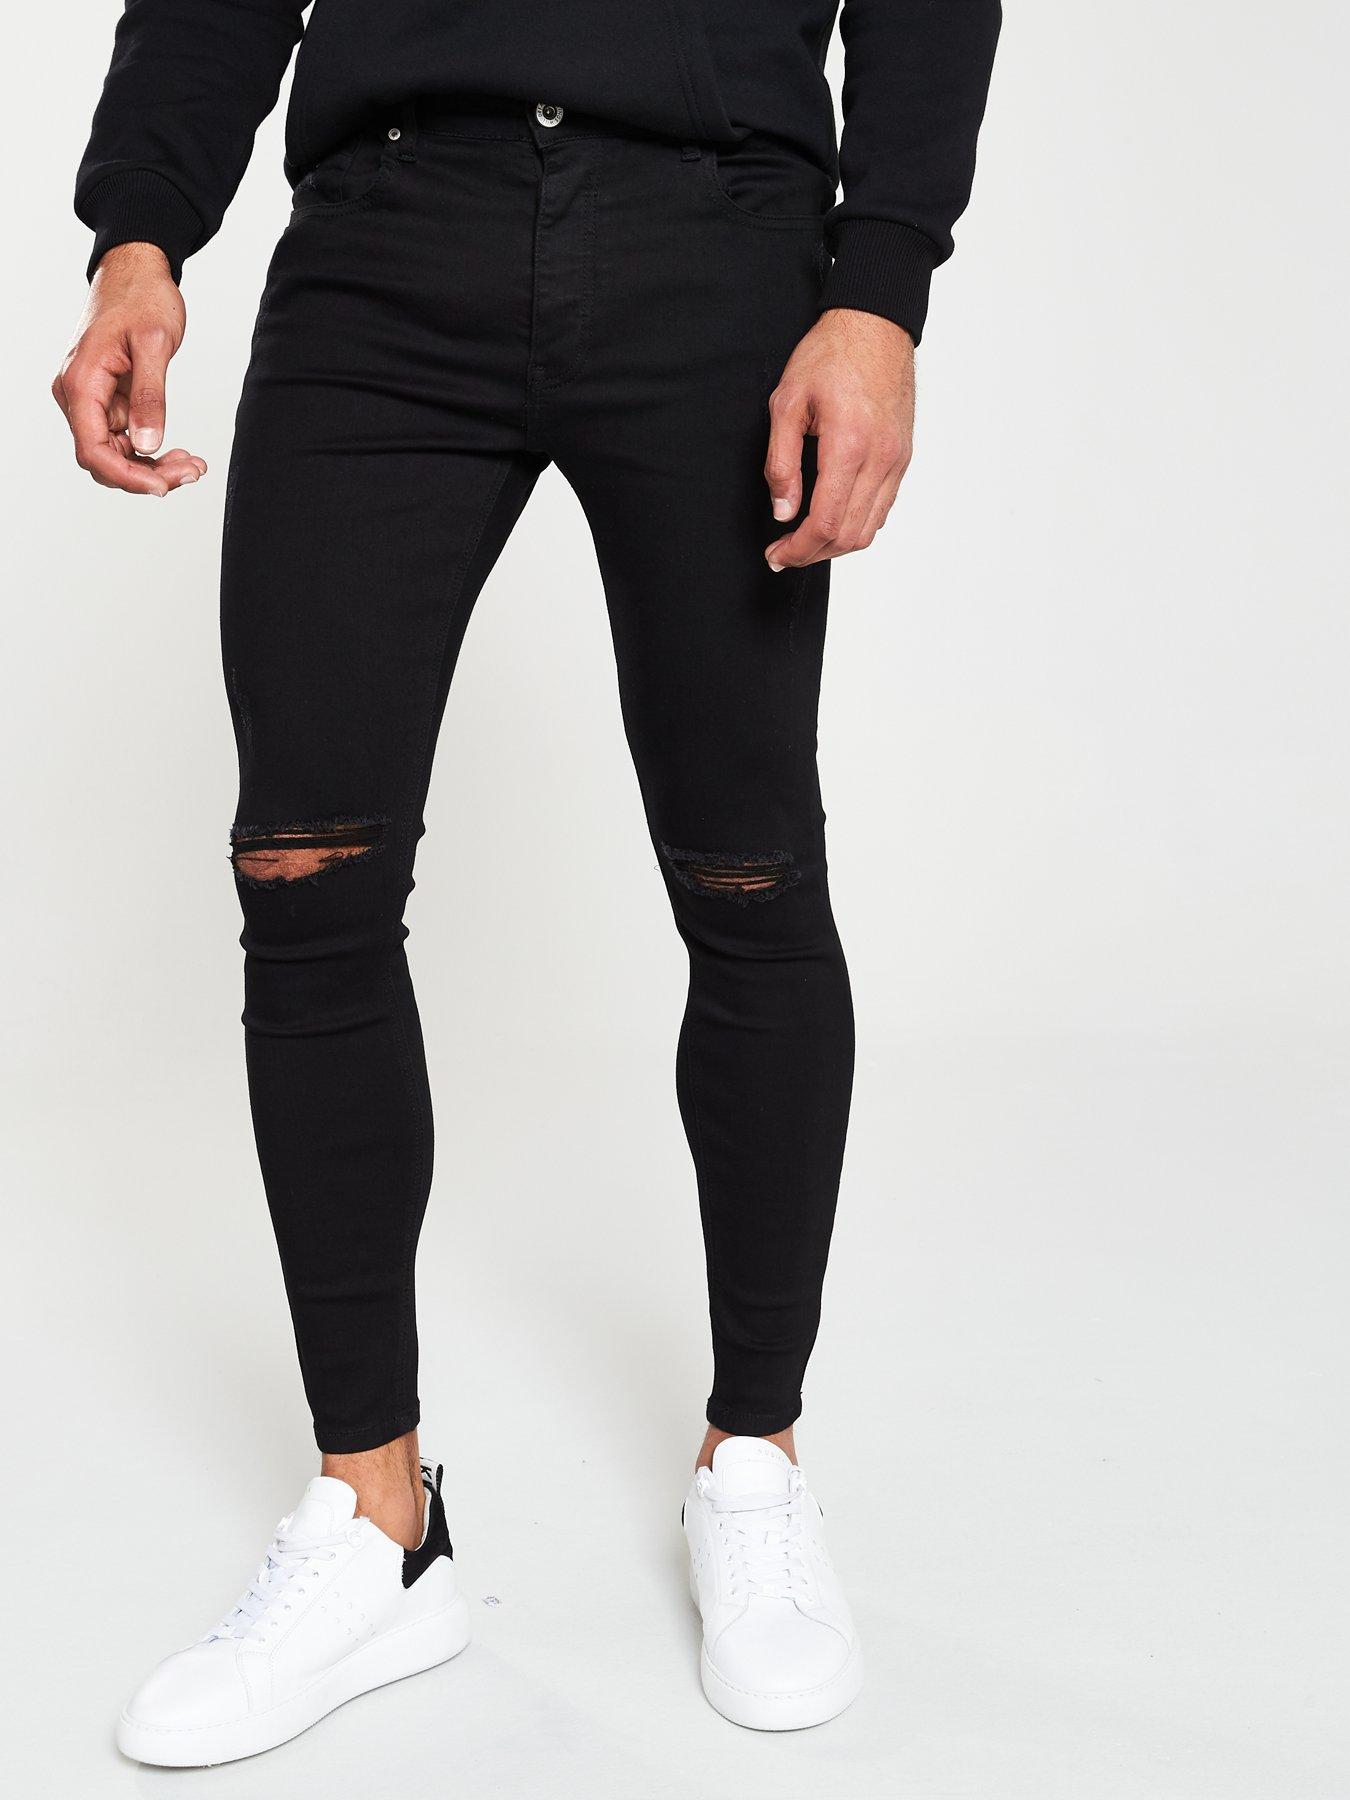 low rise and high rise jeans